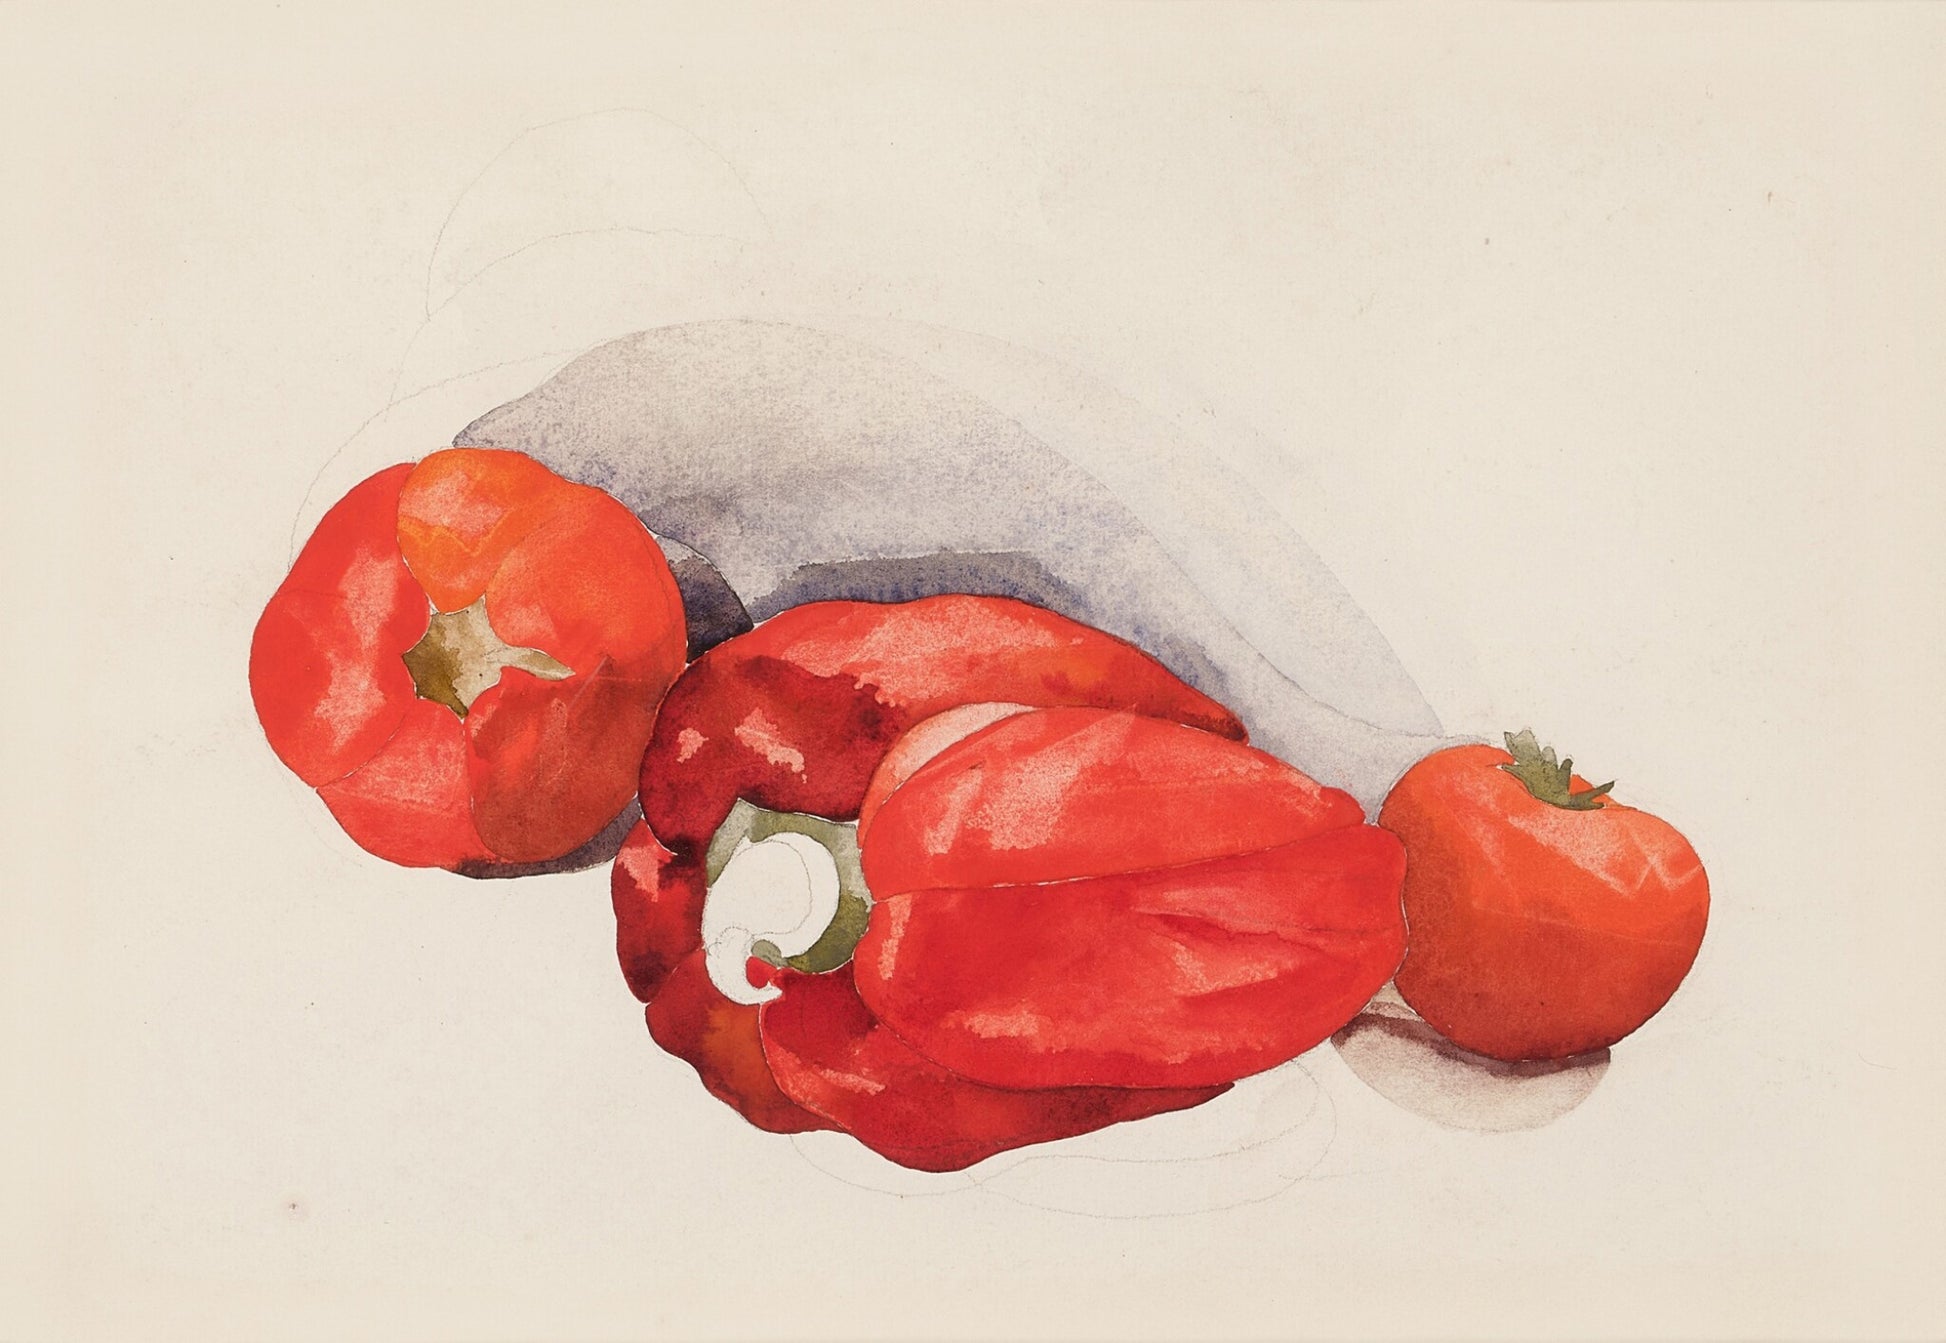 Pepper and Tomatoes artwork (1920s) | Charles Demuth Posters, Prints, & Visual Artwork The Trumpet Shop   